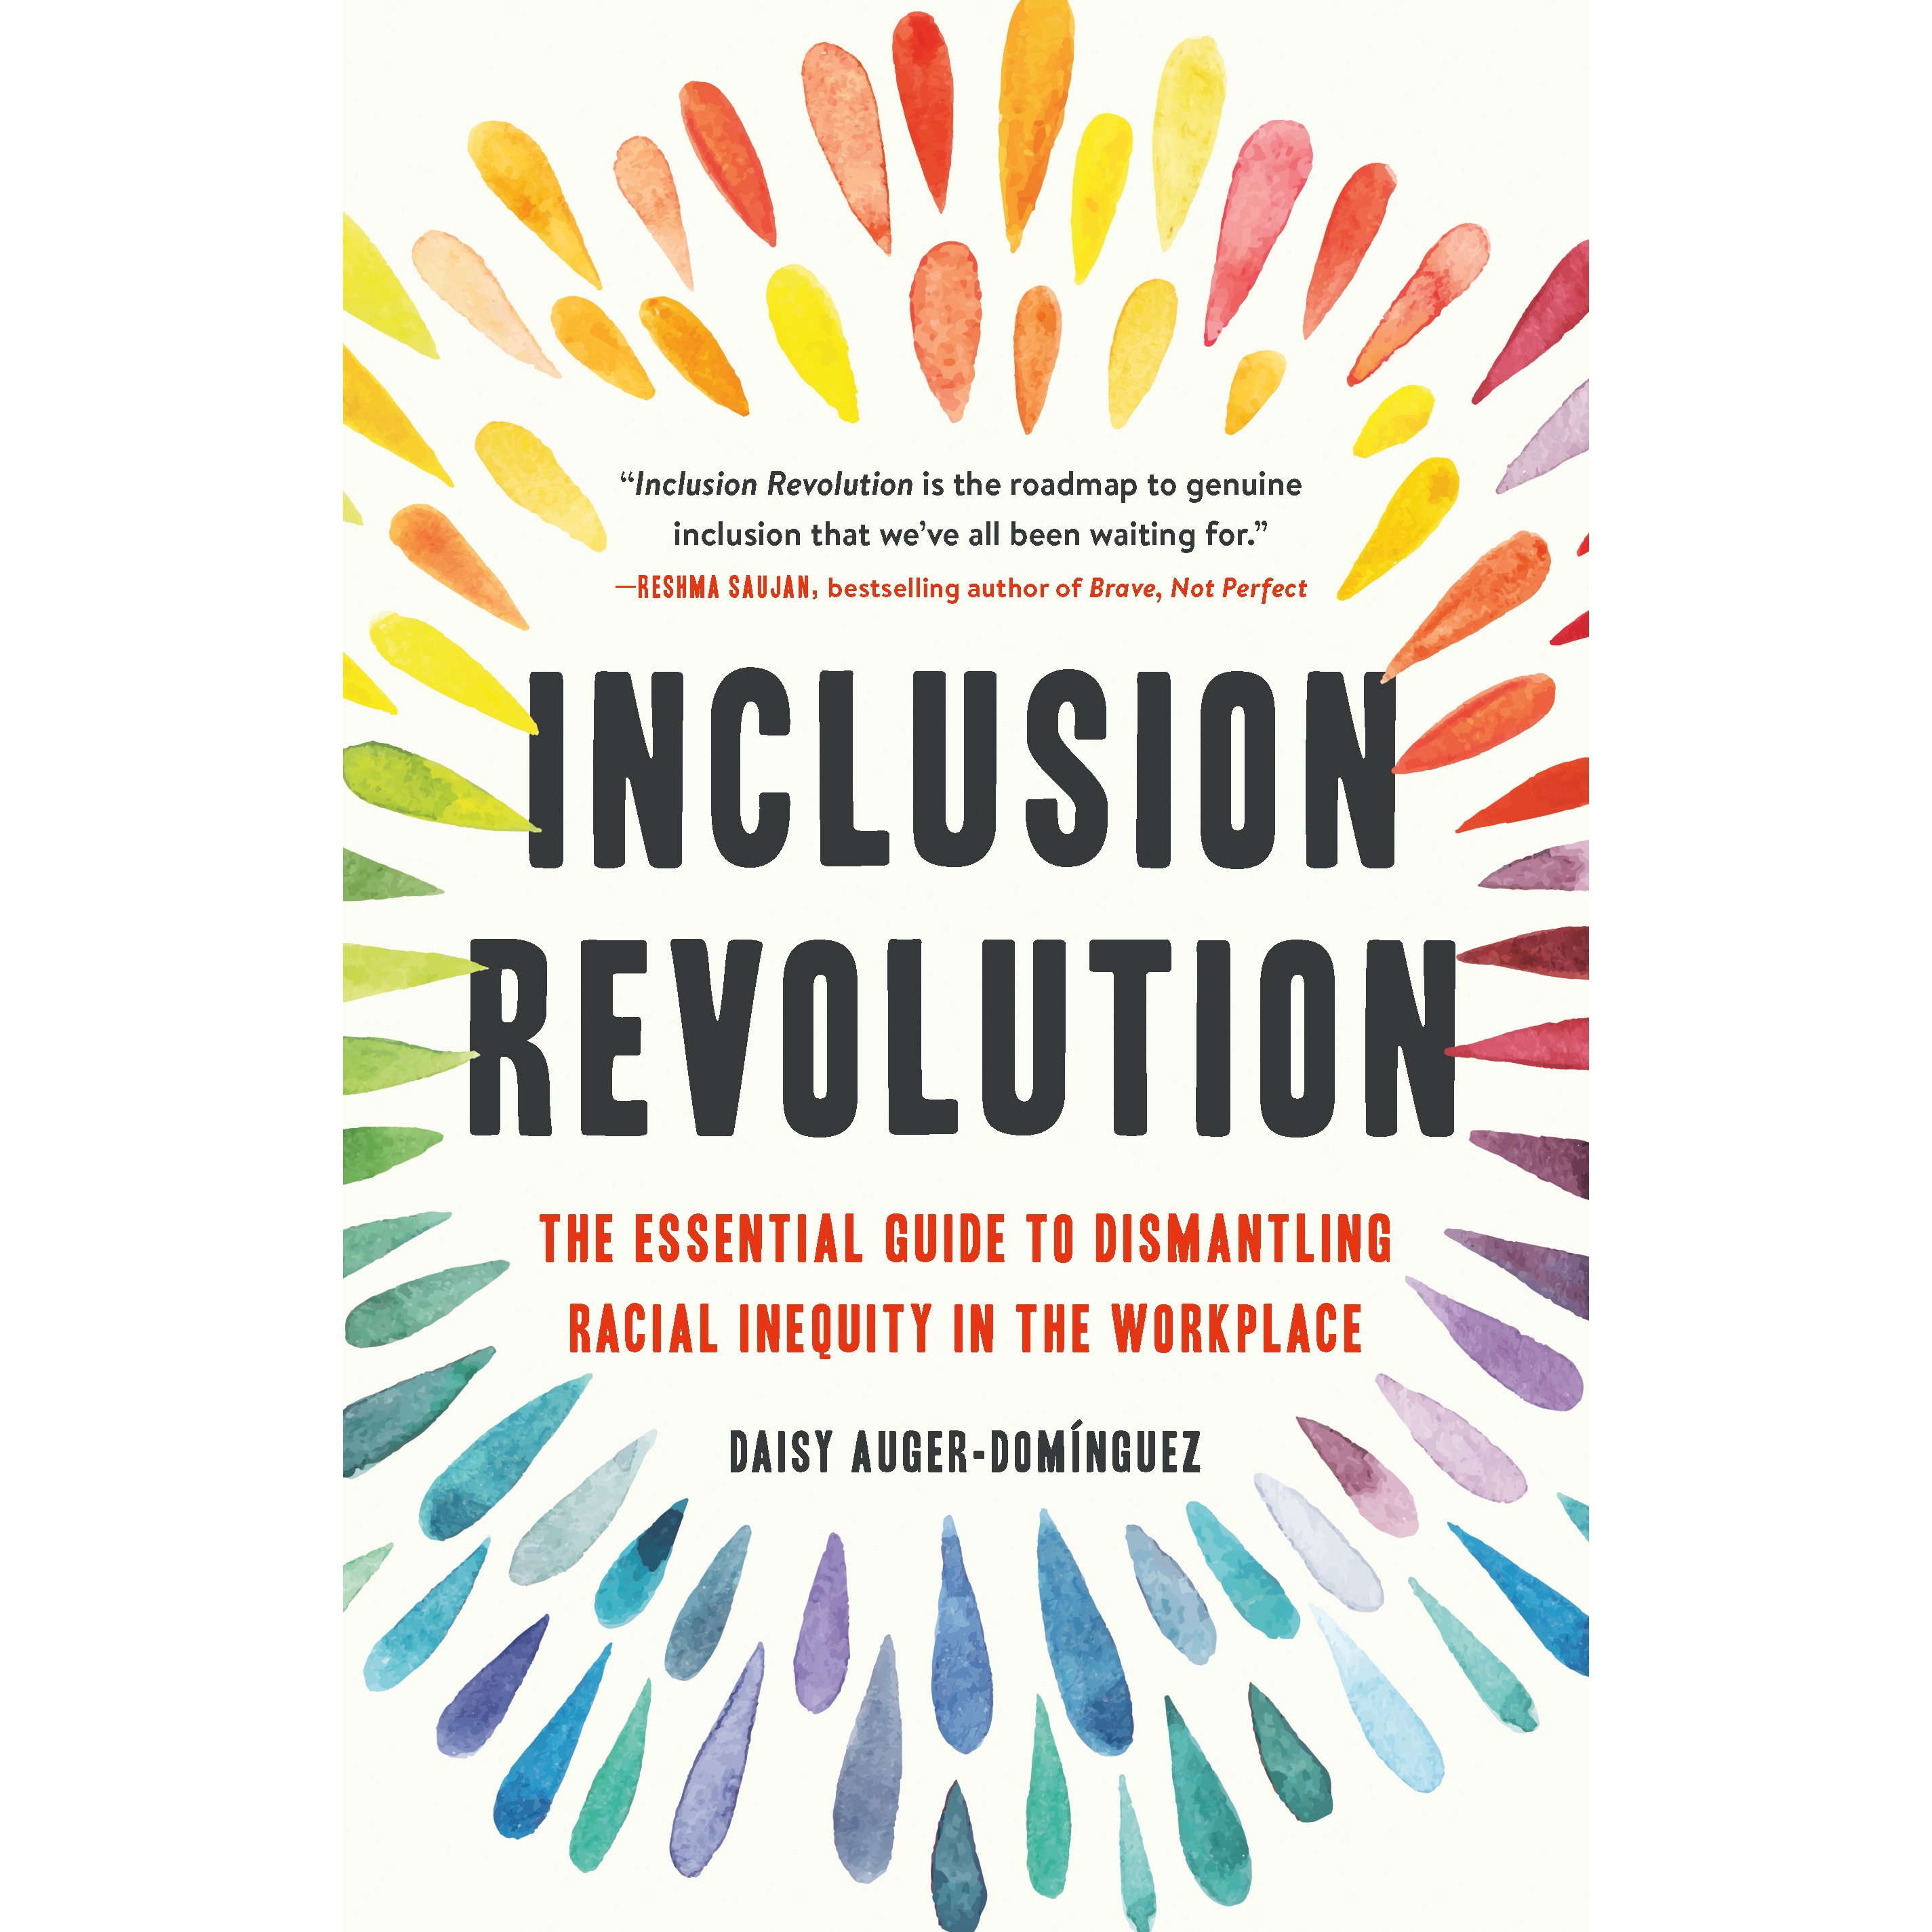 Cover image for  article: Inclusion Revolution: The Essential Guide to Dismantling Racial Inequity in the Workplace by Daisy Auger-Domínguez (Book excerpt)